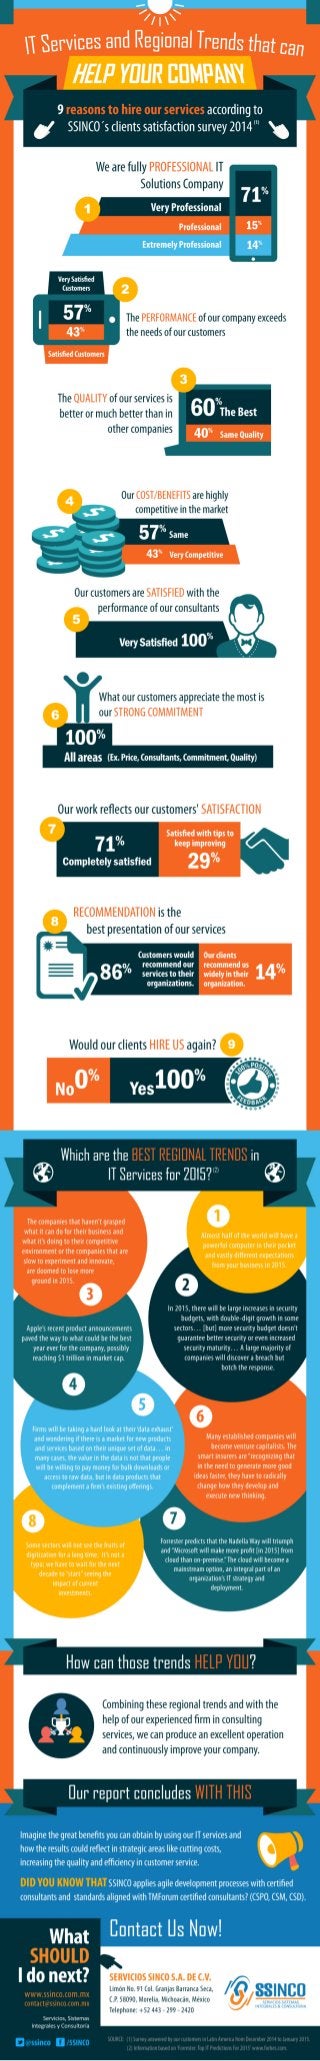 The NEW IT Services and Regional Trends that can HELP YOUR COMPANY